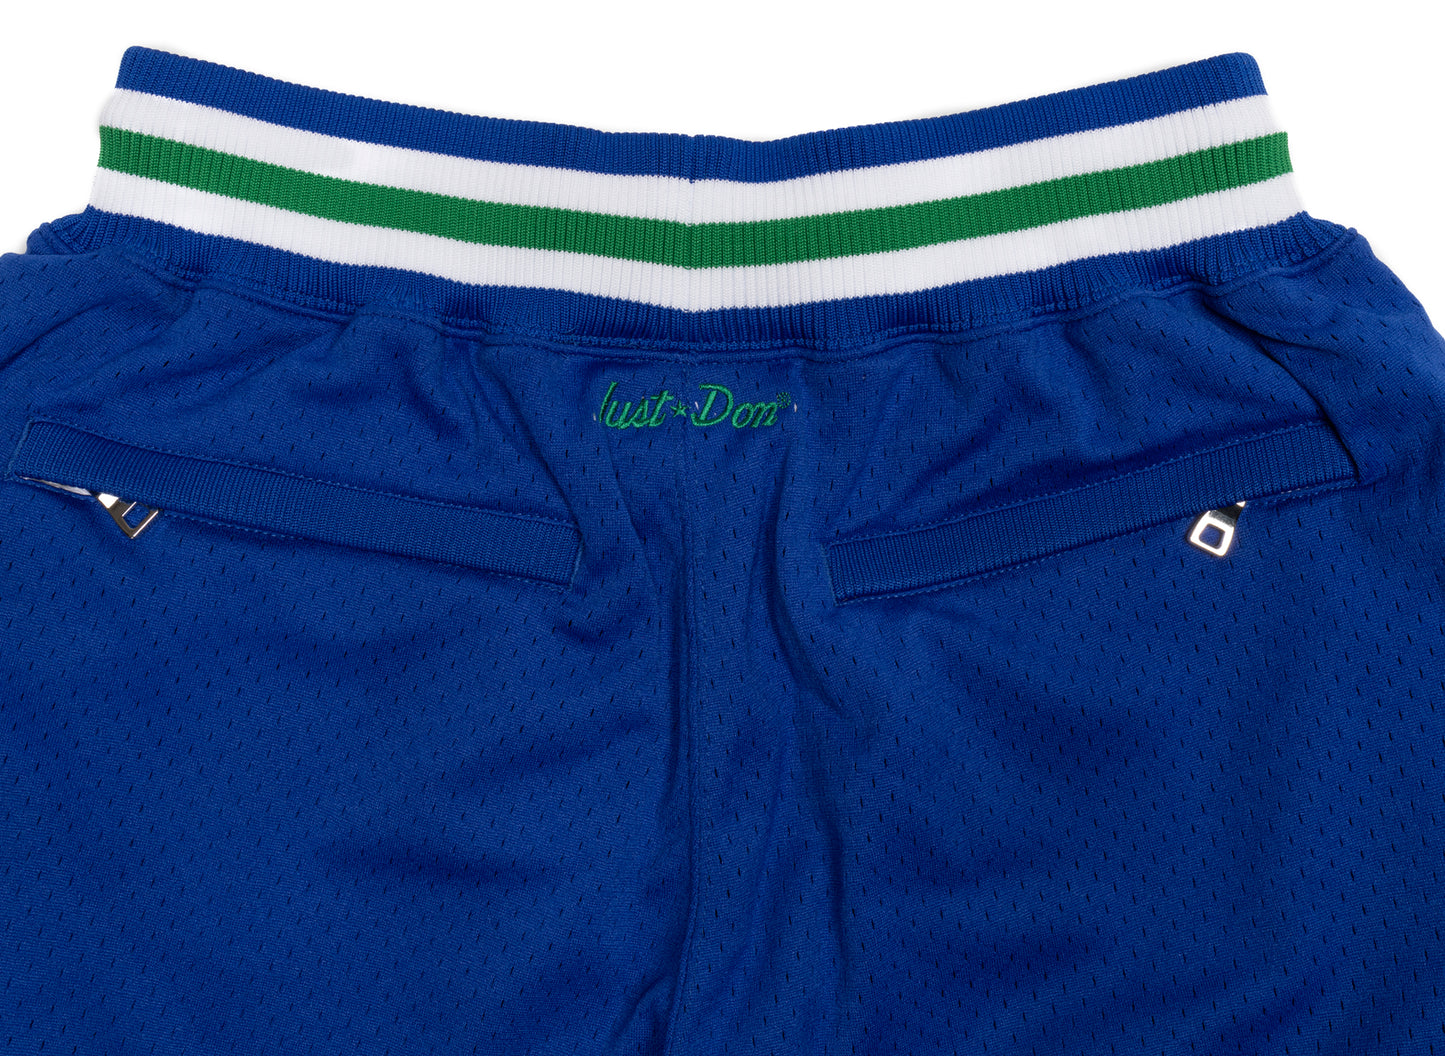 Mitchell & Ness Just Don Seahawks Throwback Shorts